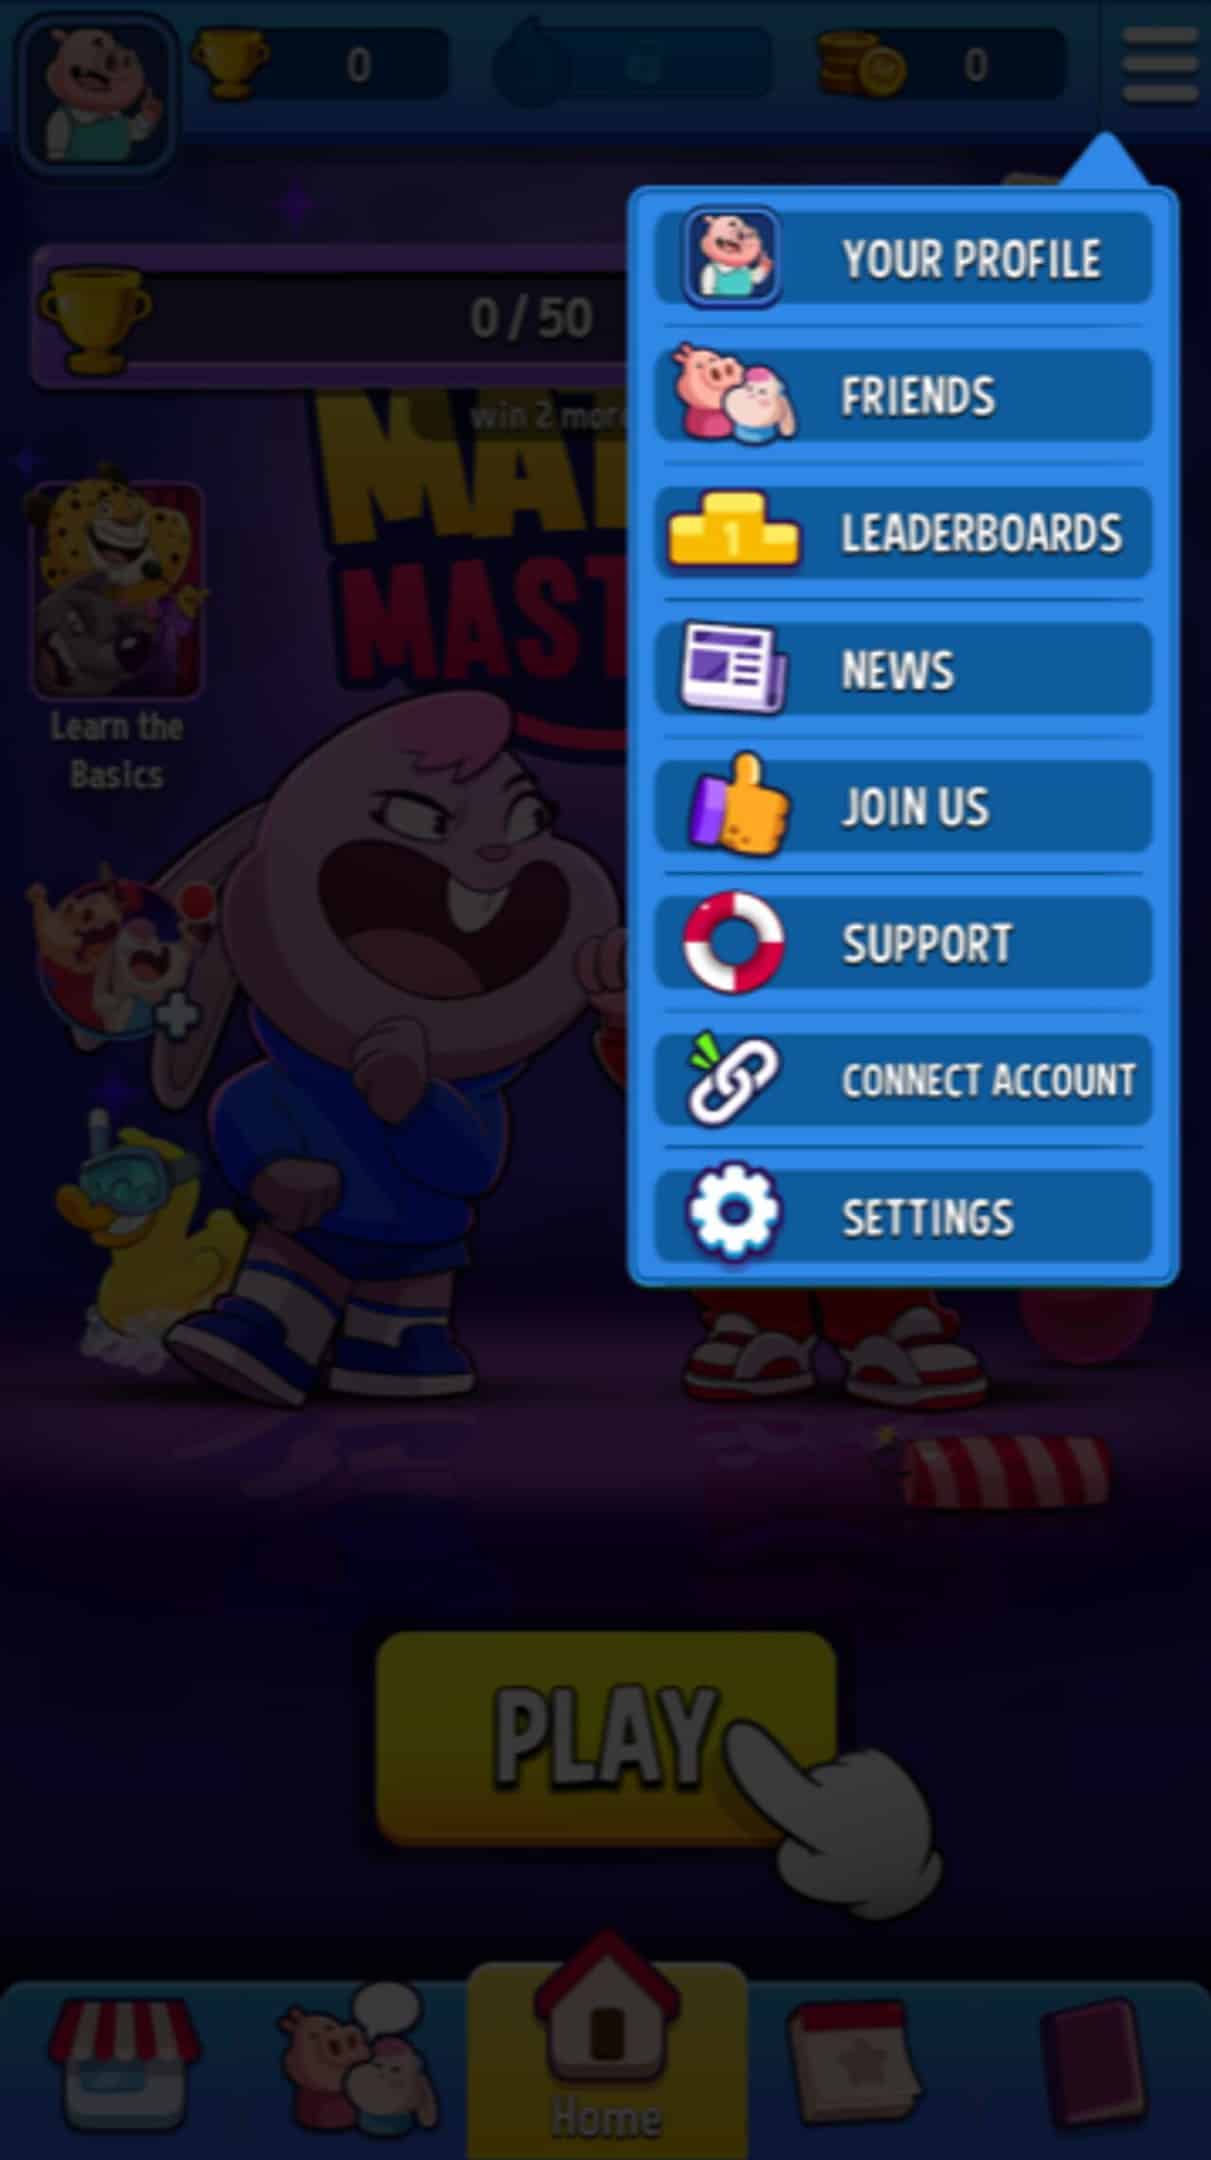 Learn how to play Match Masters with friends by checking out this screenshot from the Math master apk.